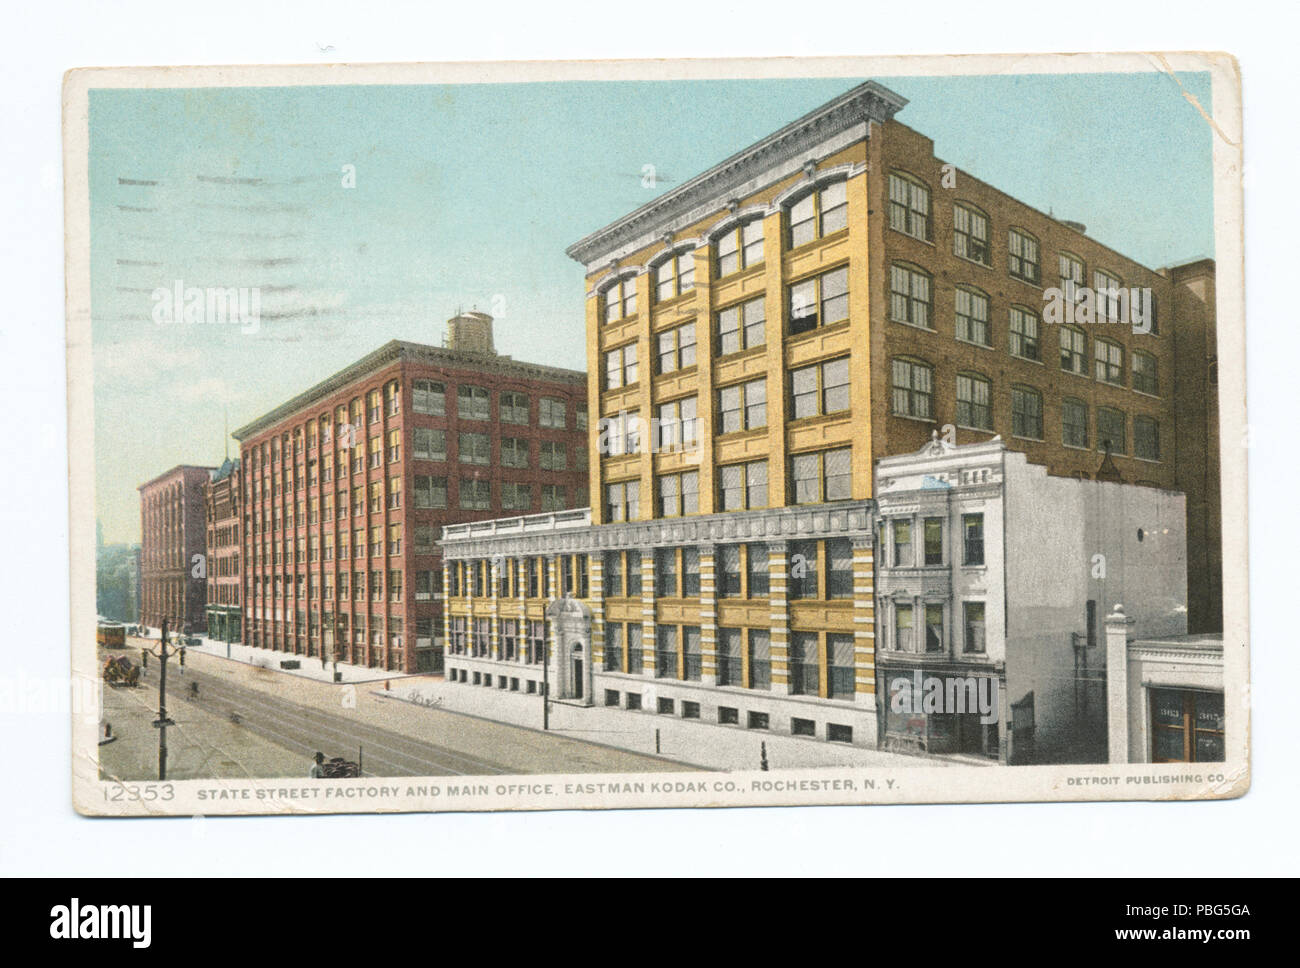 1570 State St. Factory and Main Office, Eastman Kodak Co., Rochester, N. Y (NYPL b12647398-77161) Stock Photo